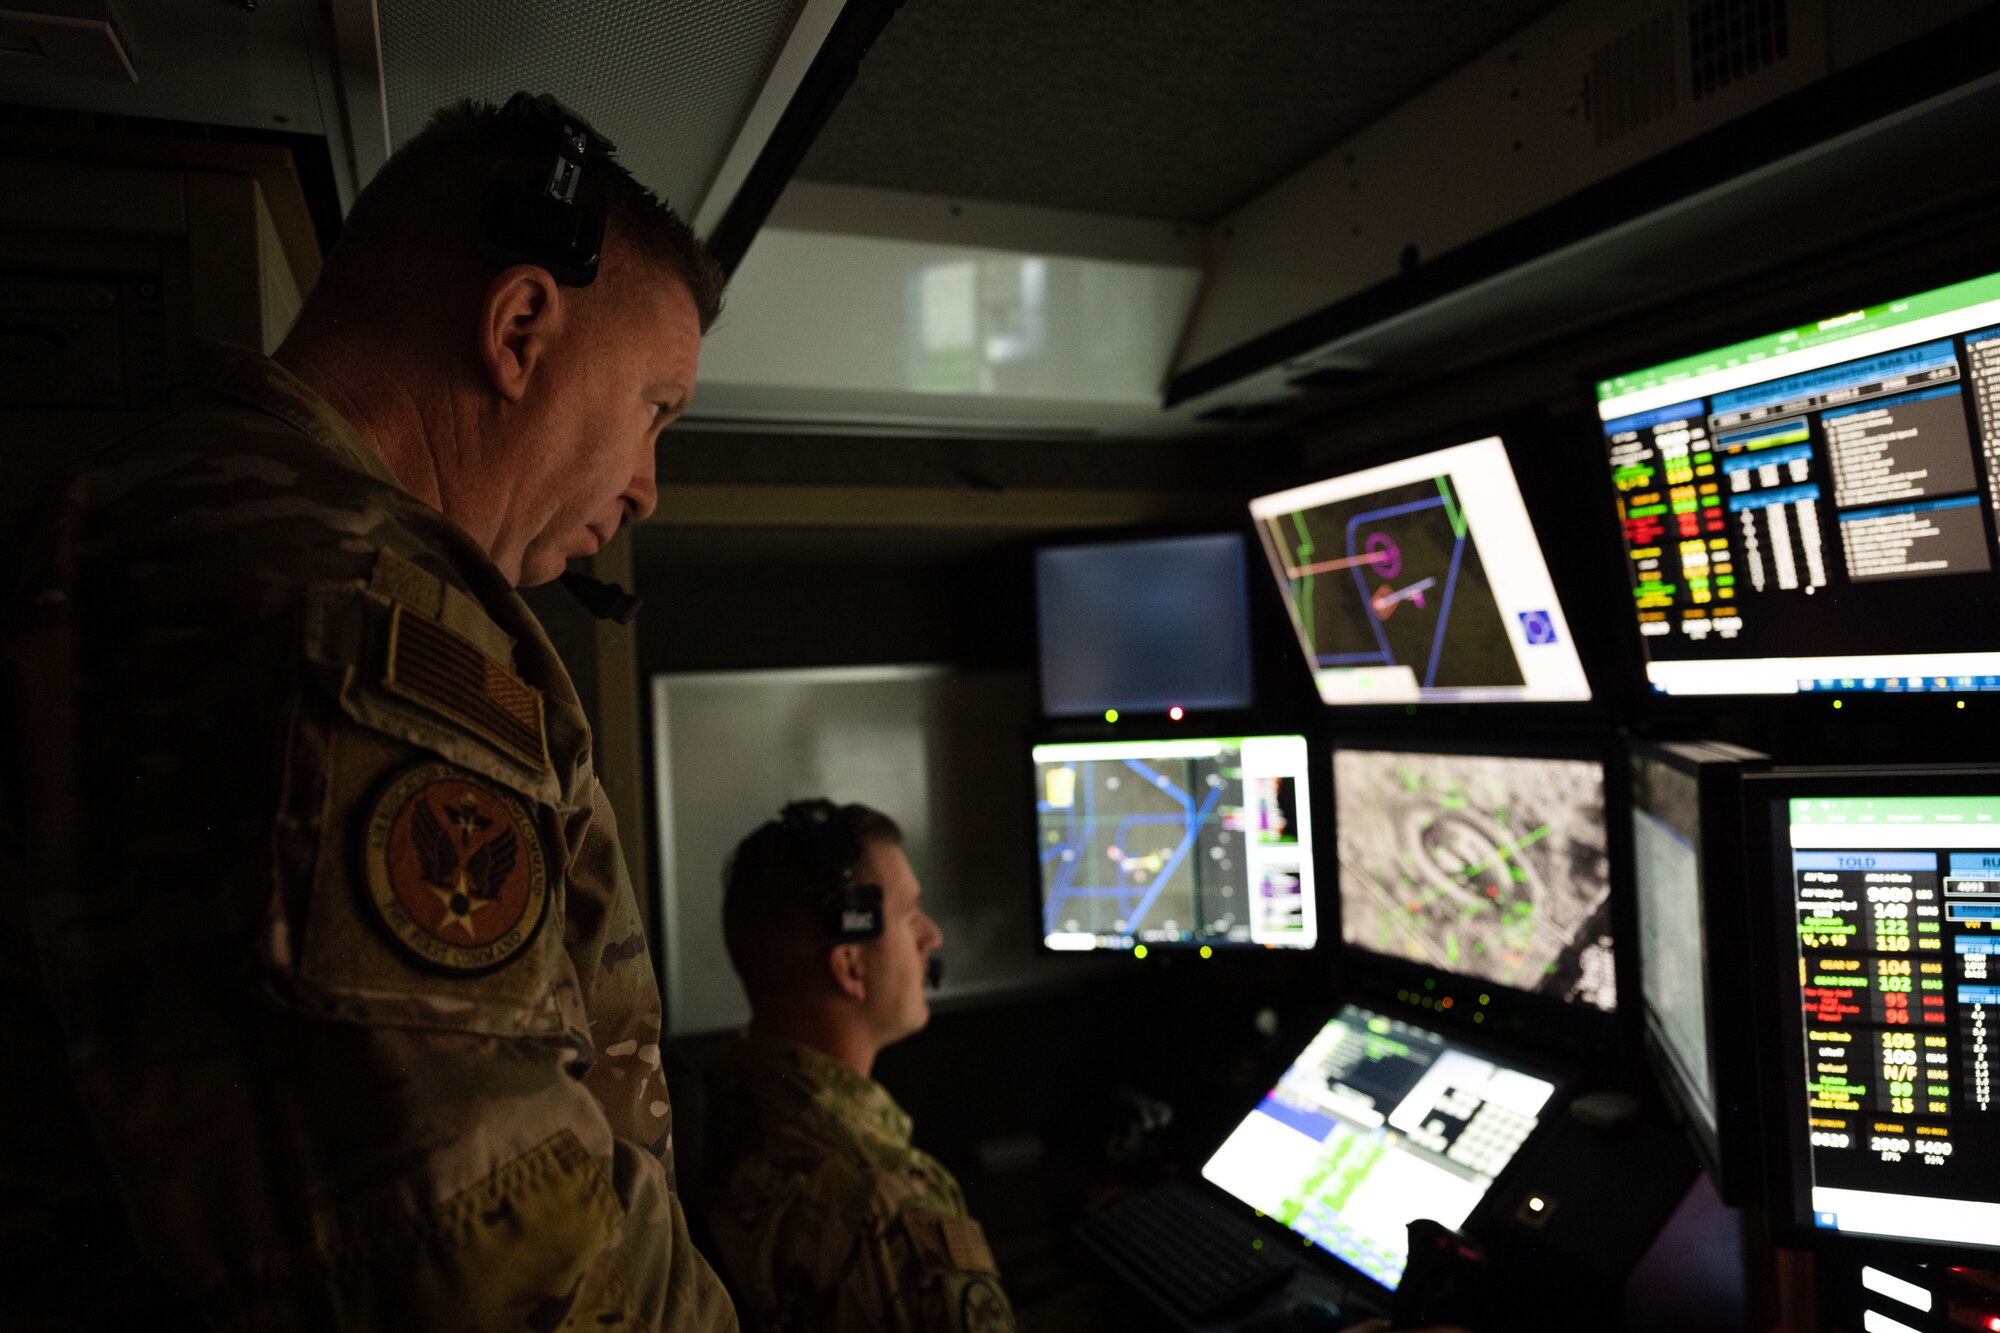 U.S. Air Force Chief Master Sgt. Chad Bickley, command chief of Air Education and Training Command, observes an MQ-9 Reaper training sortie in a ground control station at Holloman Air Force Base, New Mexico, Nov. 8, 2023. Bickley, who assumed the AETC command chief position in June, spoke with and learned from Airmen across the 49th Wing as they conducted their mission of Building Combat Aircrew. (U.S. Air Force photo by Senior Airman Antonio Salfran)